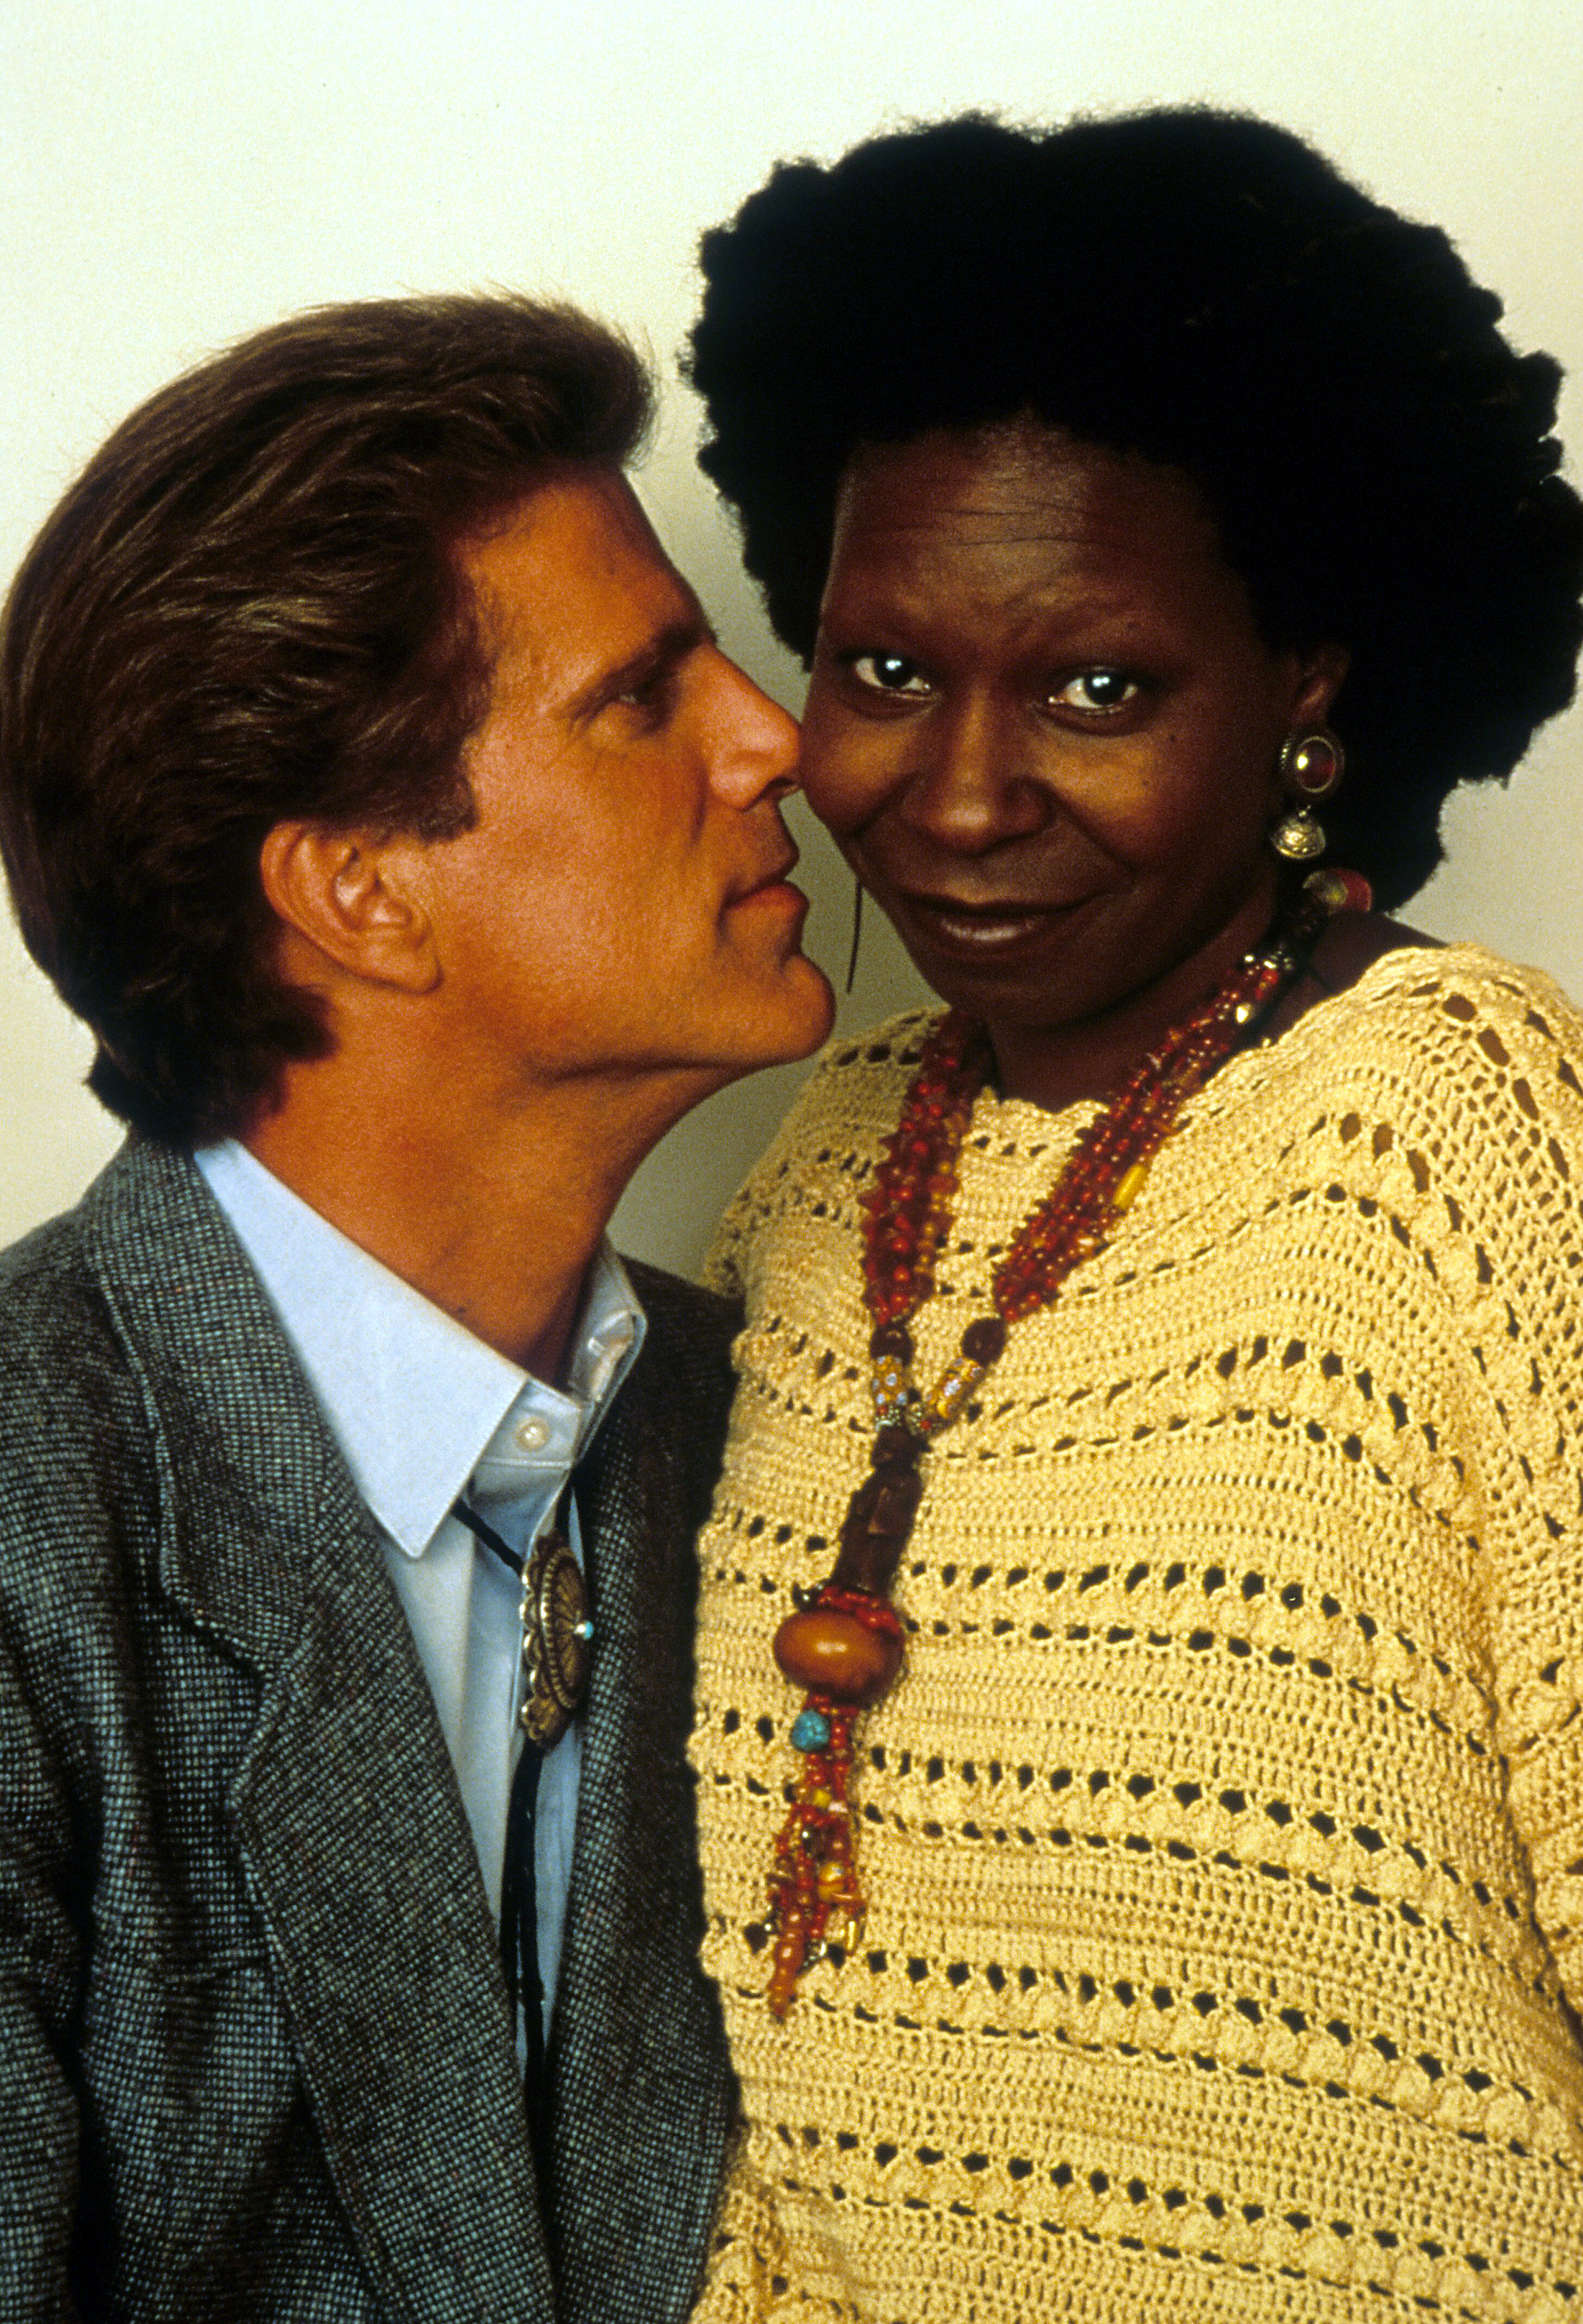 Ted Danson and Whoopi Goldberg in a scene from the movie "Made In America" in 1993 | Source: Getty Images